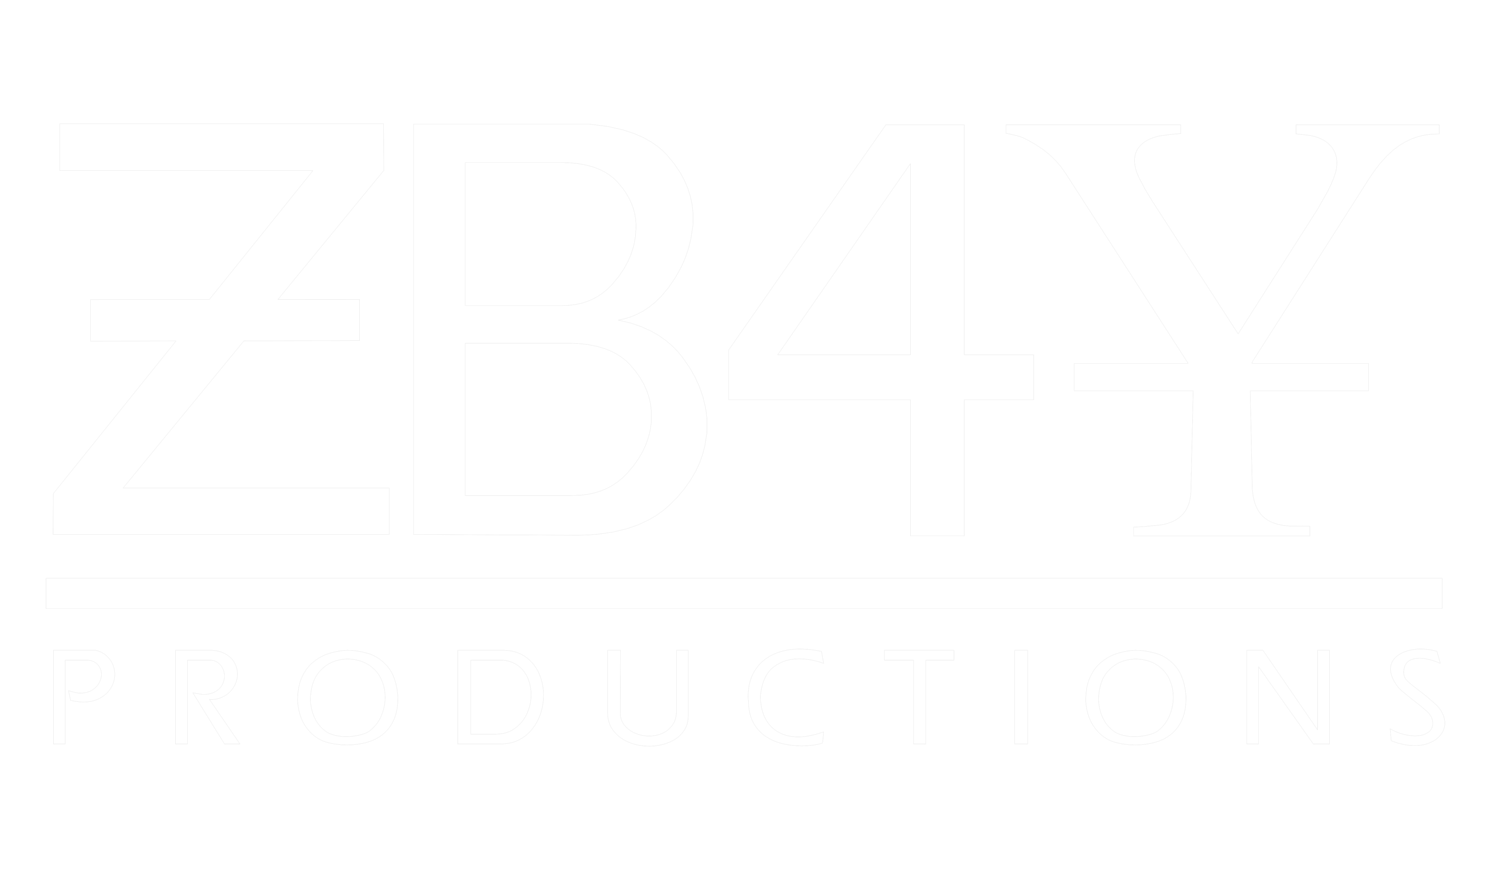 ZB4Y Productions